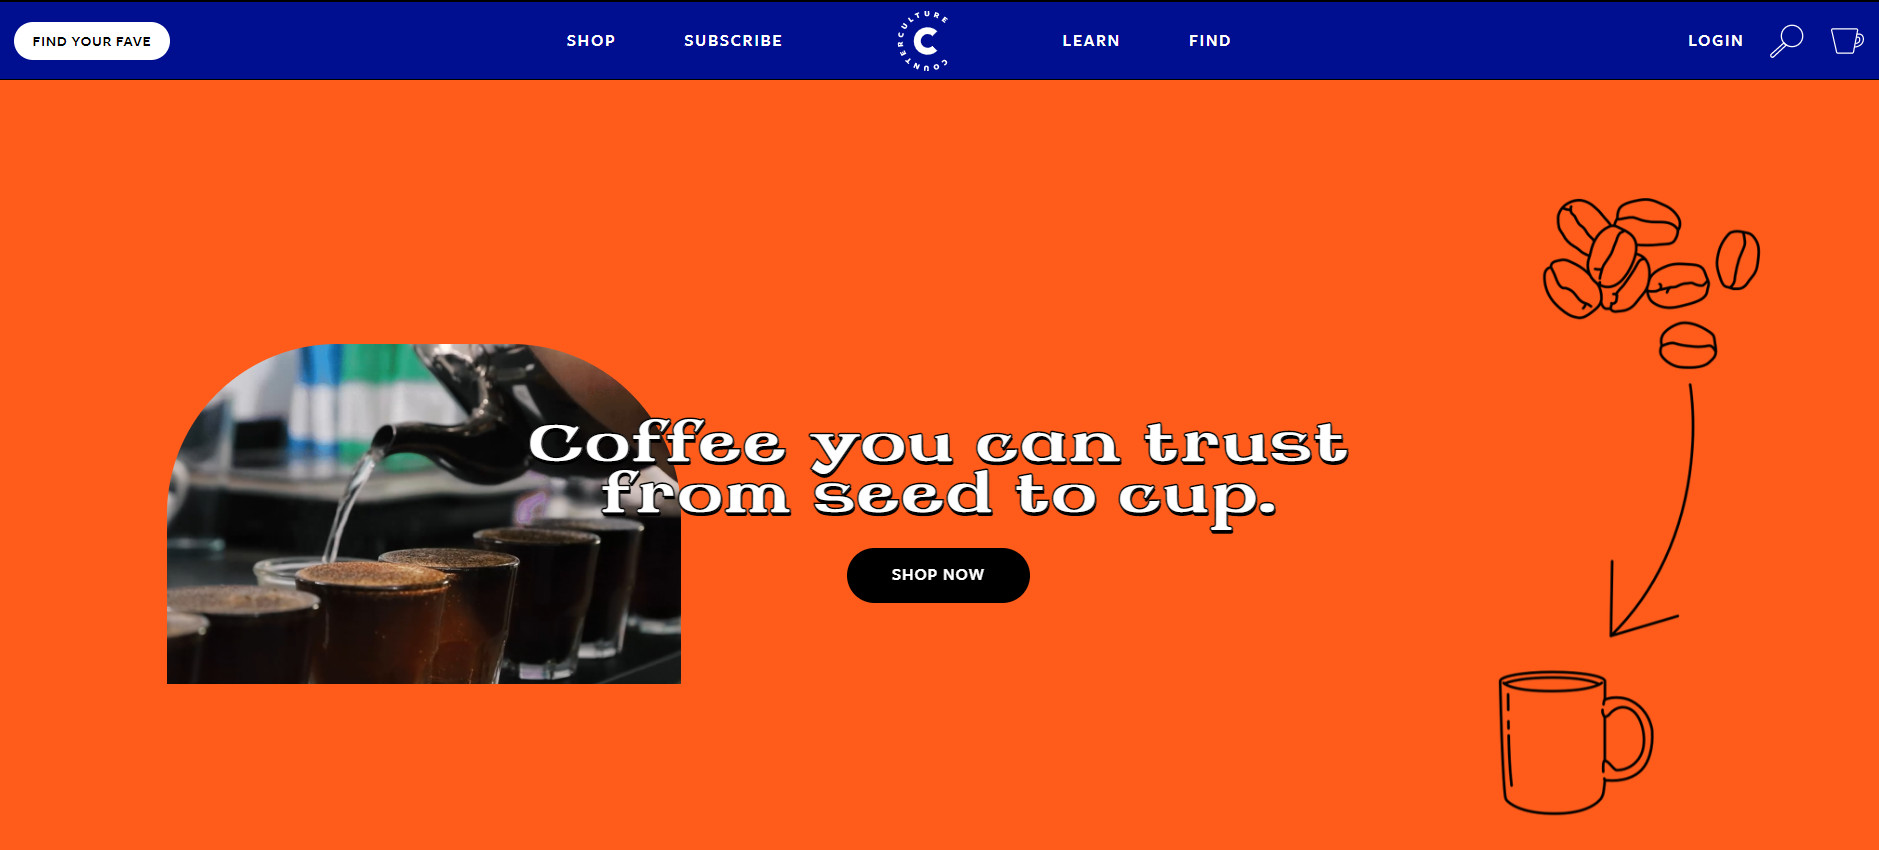 best coffee shop website example: Counter Culture Coffee